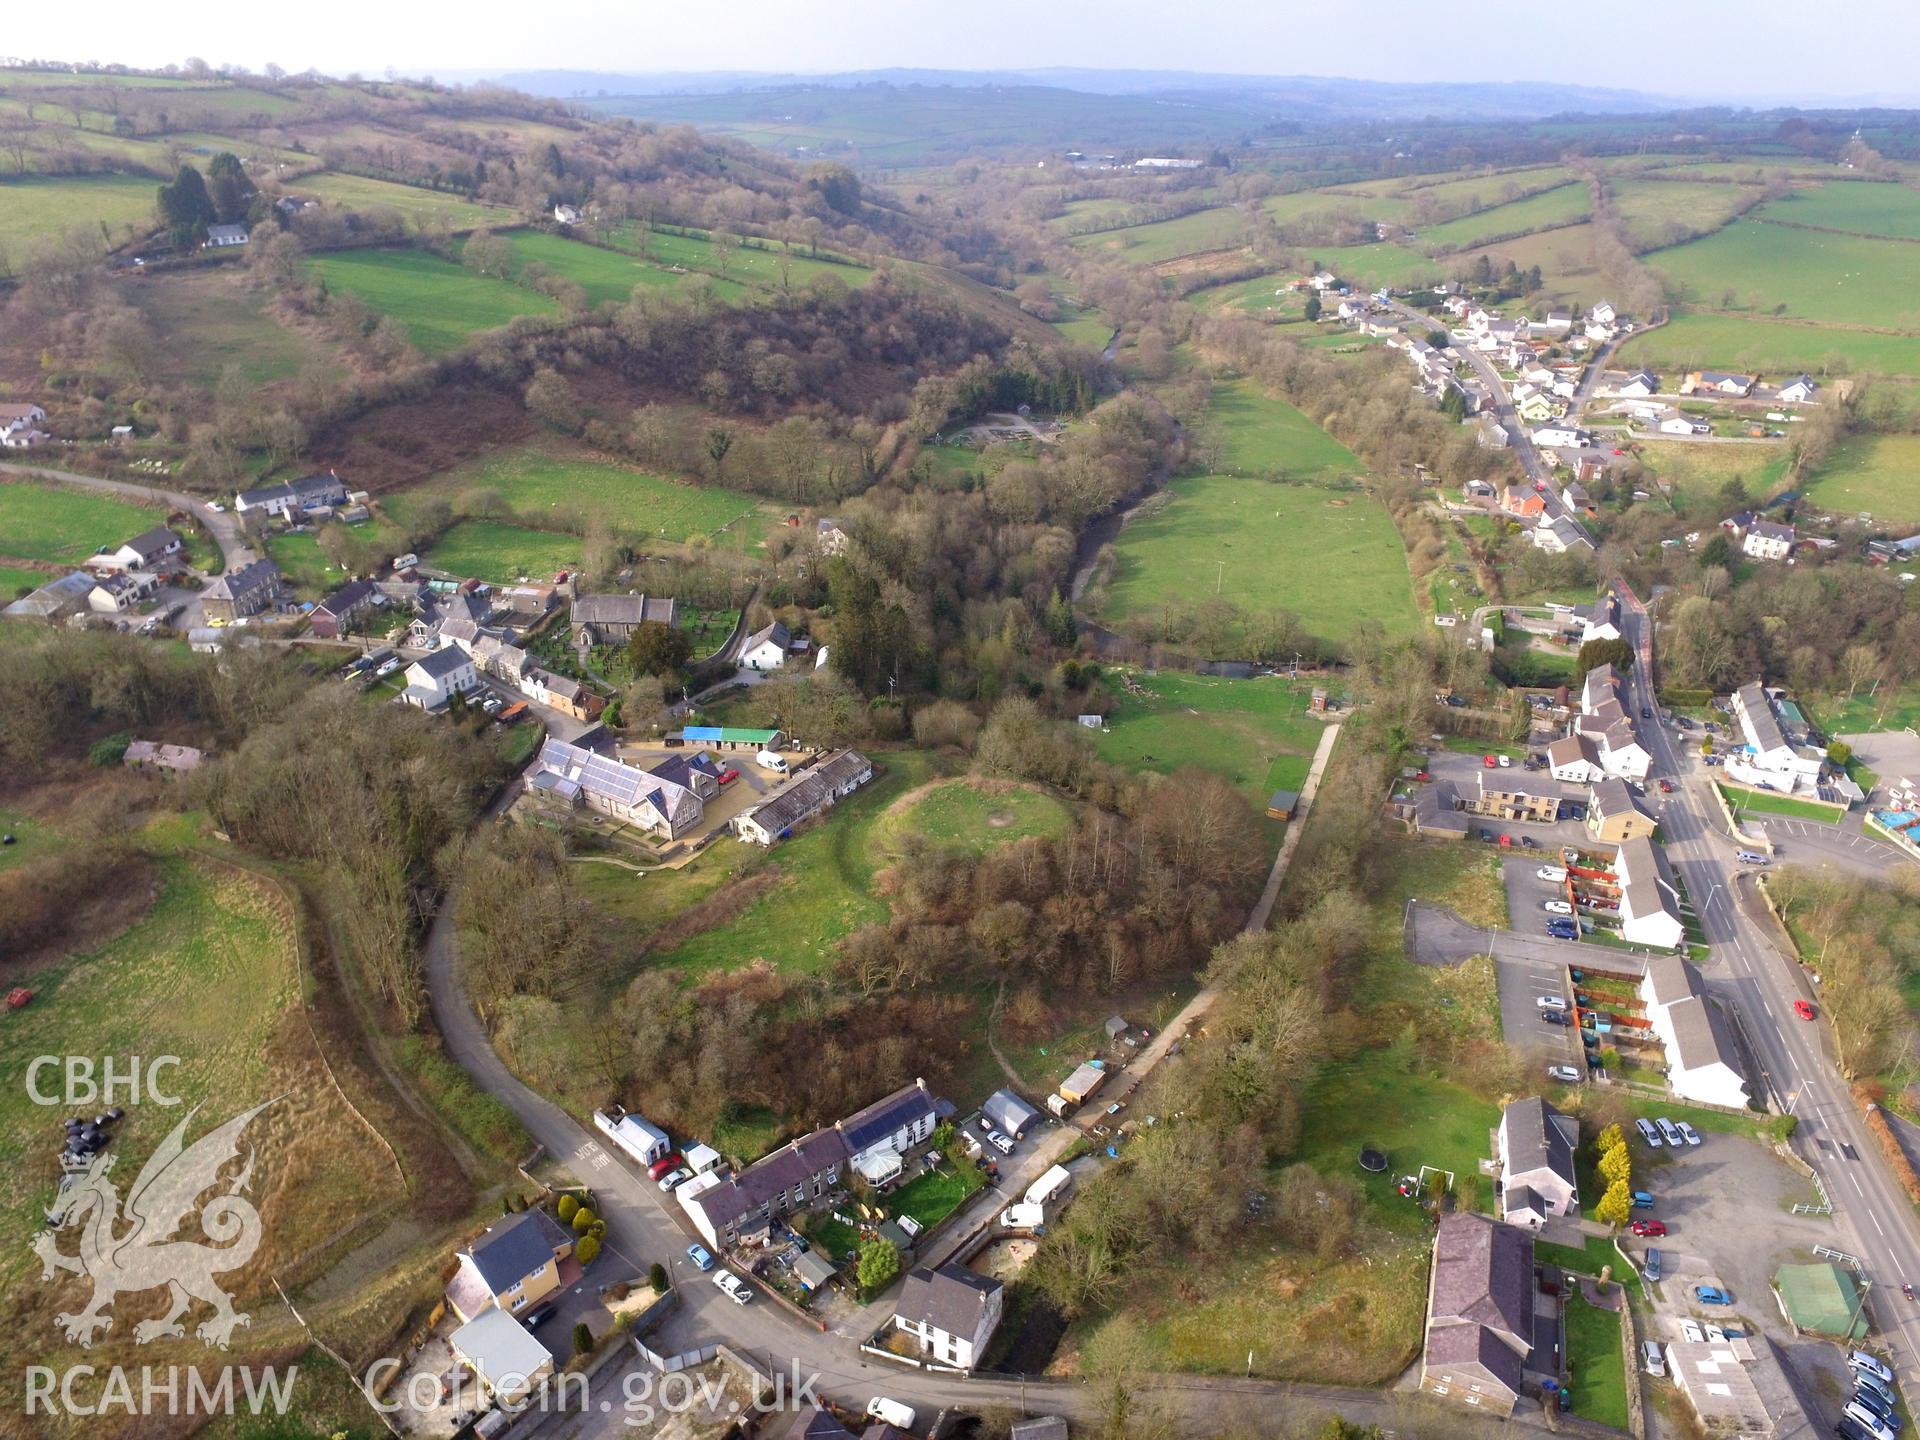 Colour photo showing view of Castell Pencader, taken by Paul R. Davis, 2018.